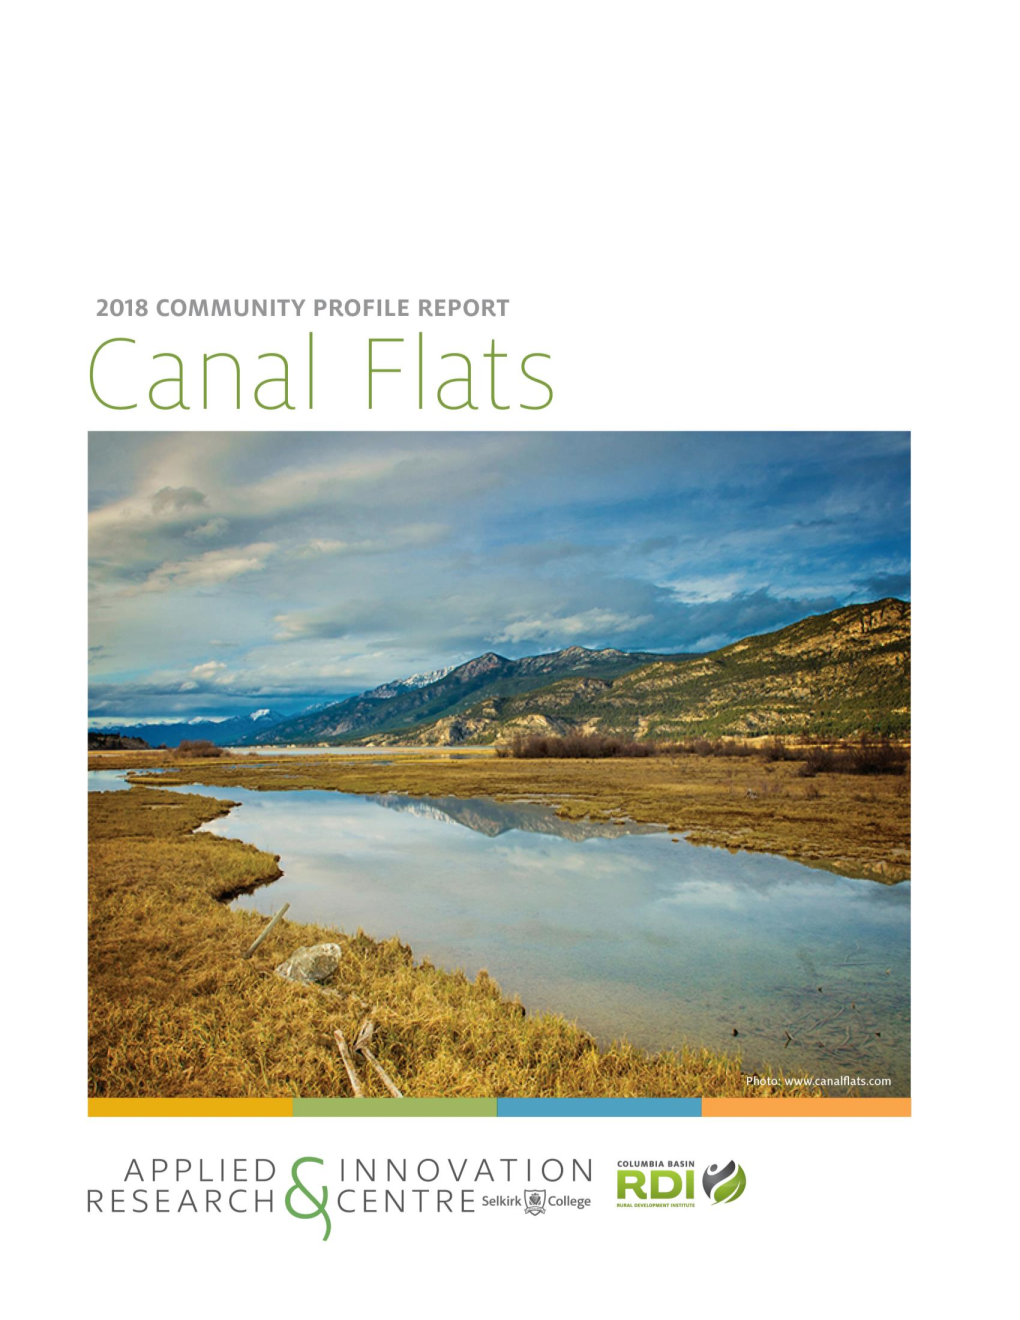 Canal Flats Is Half Way Between Cranbrook to Its South and Invermere to Its North